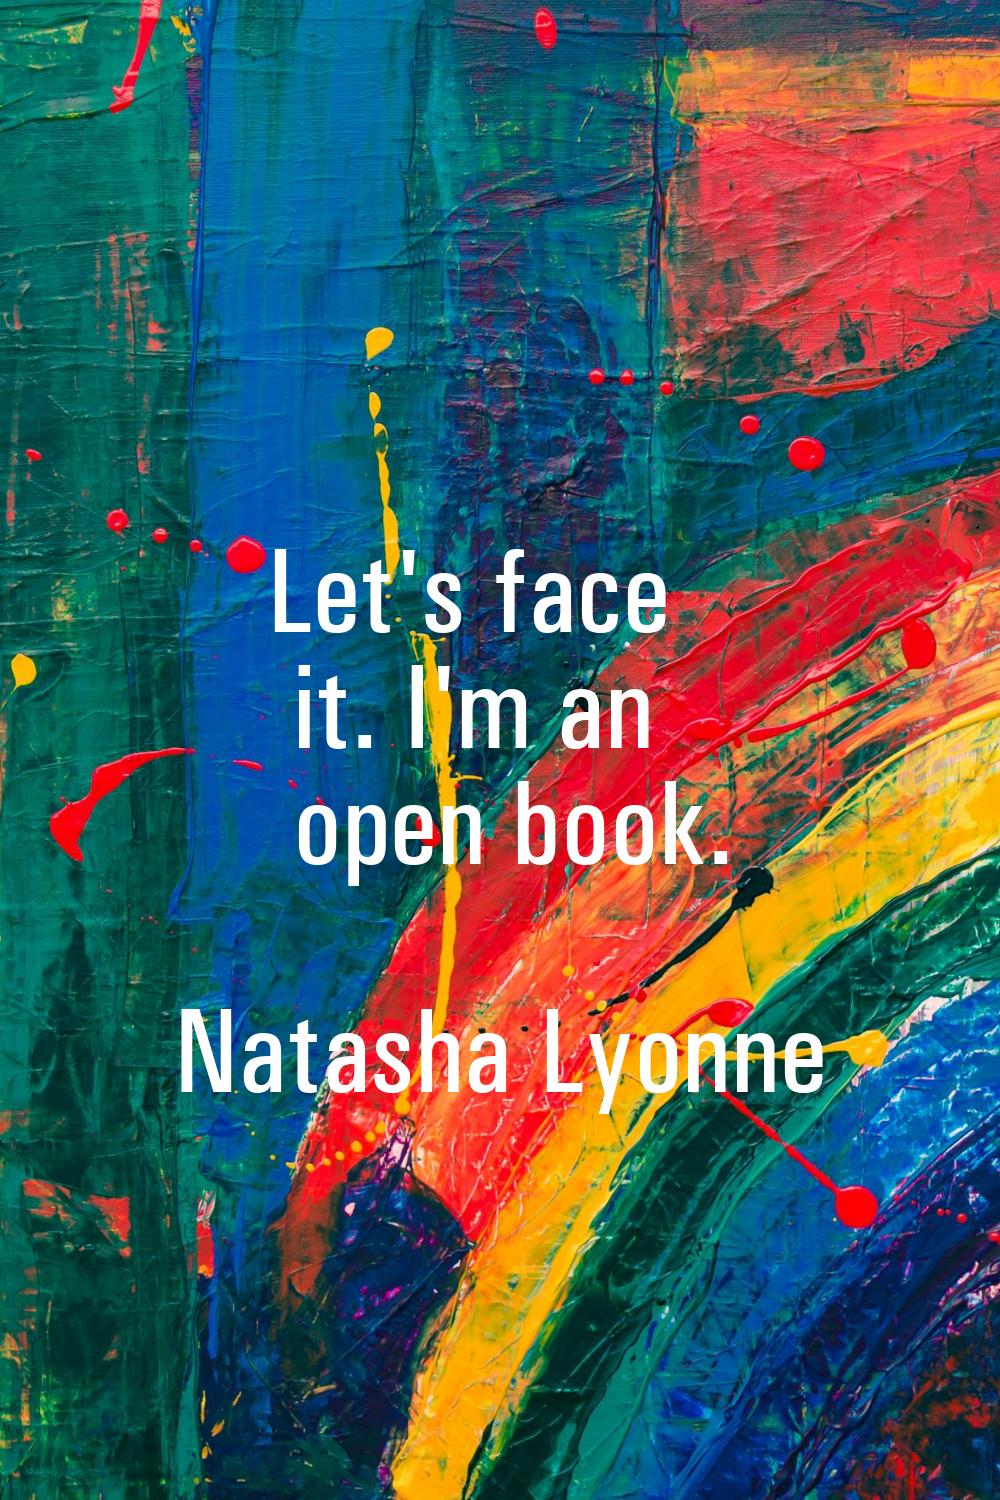 Let's face it. I'm an open book.